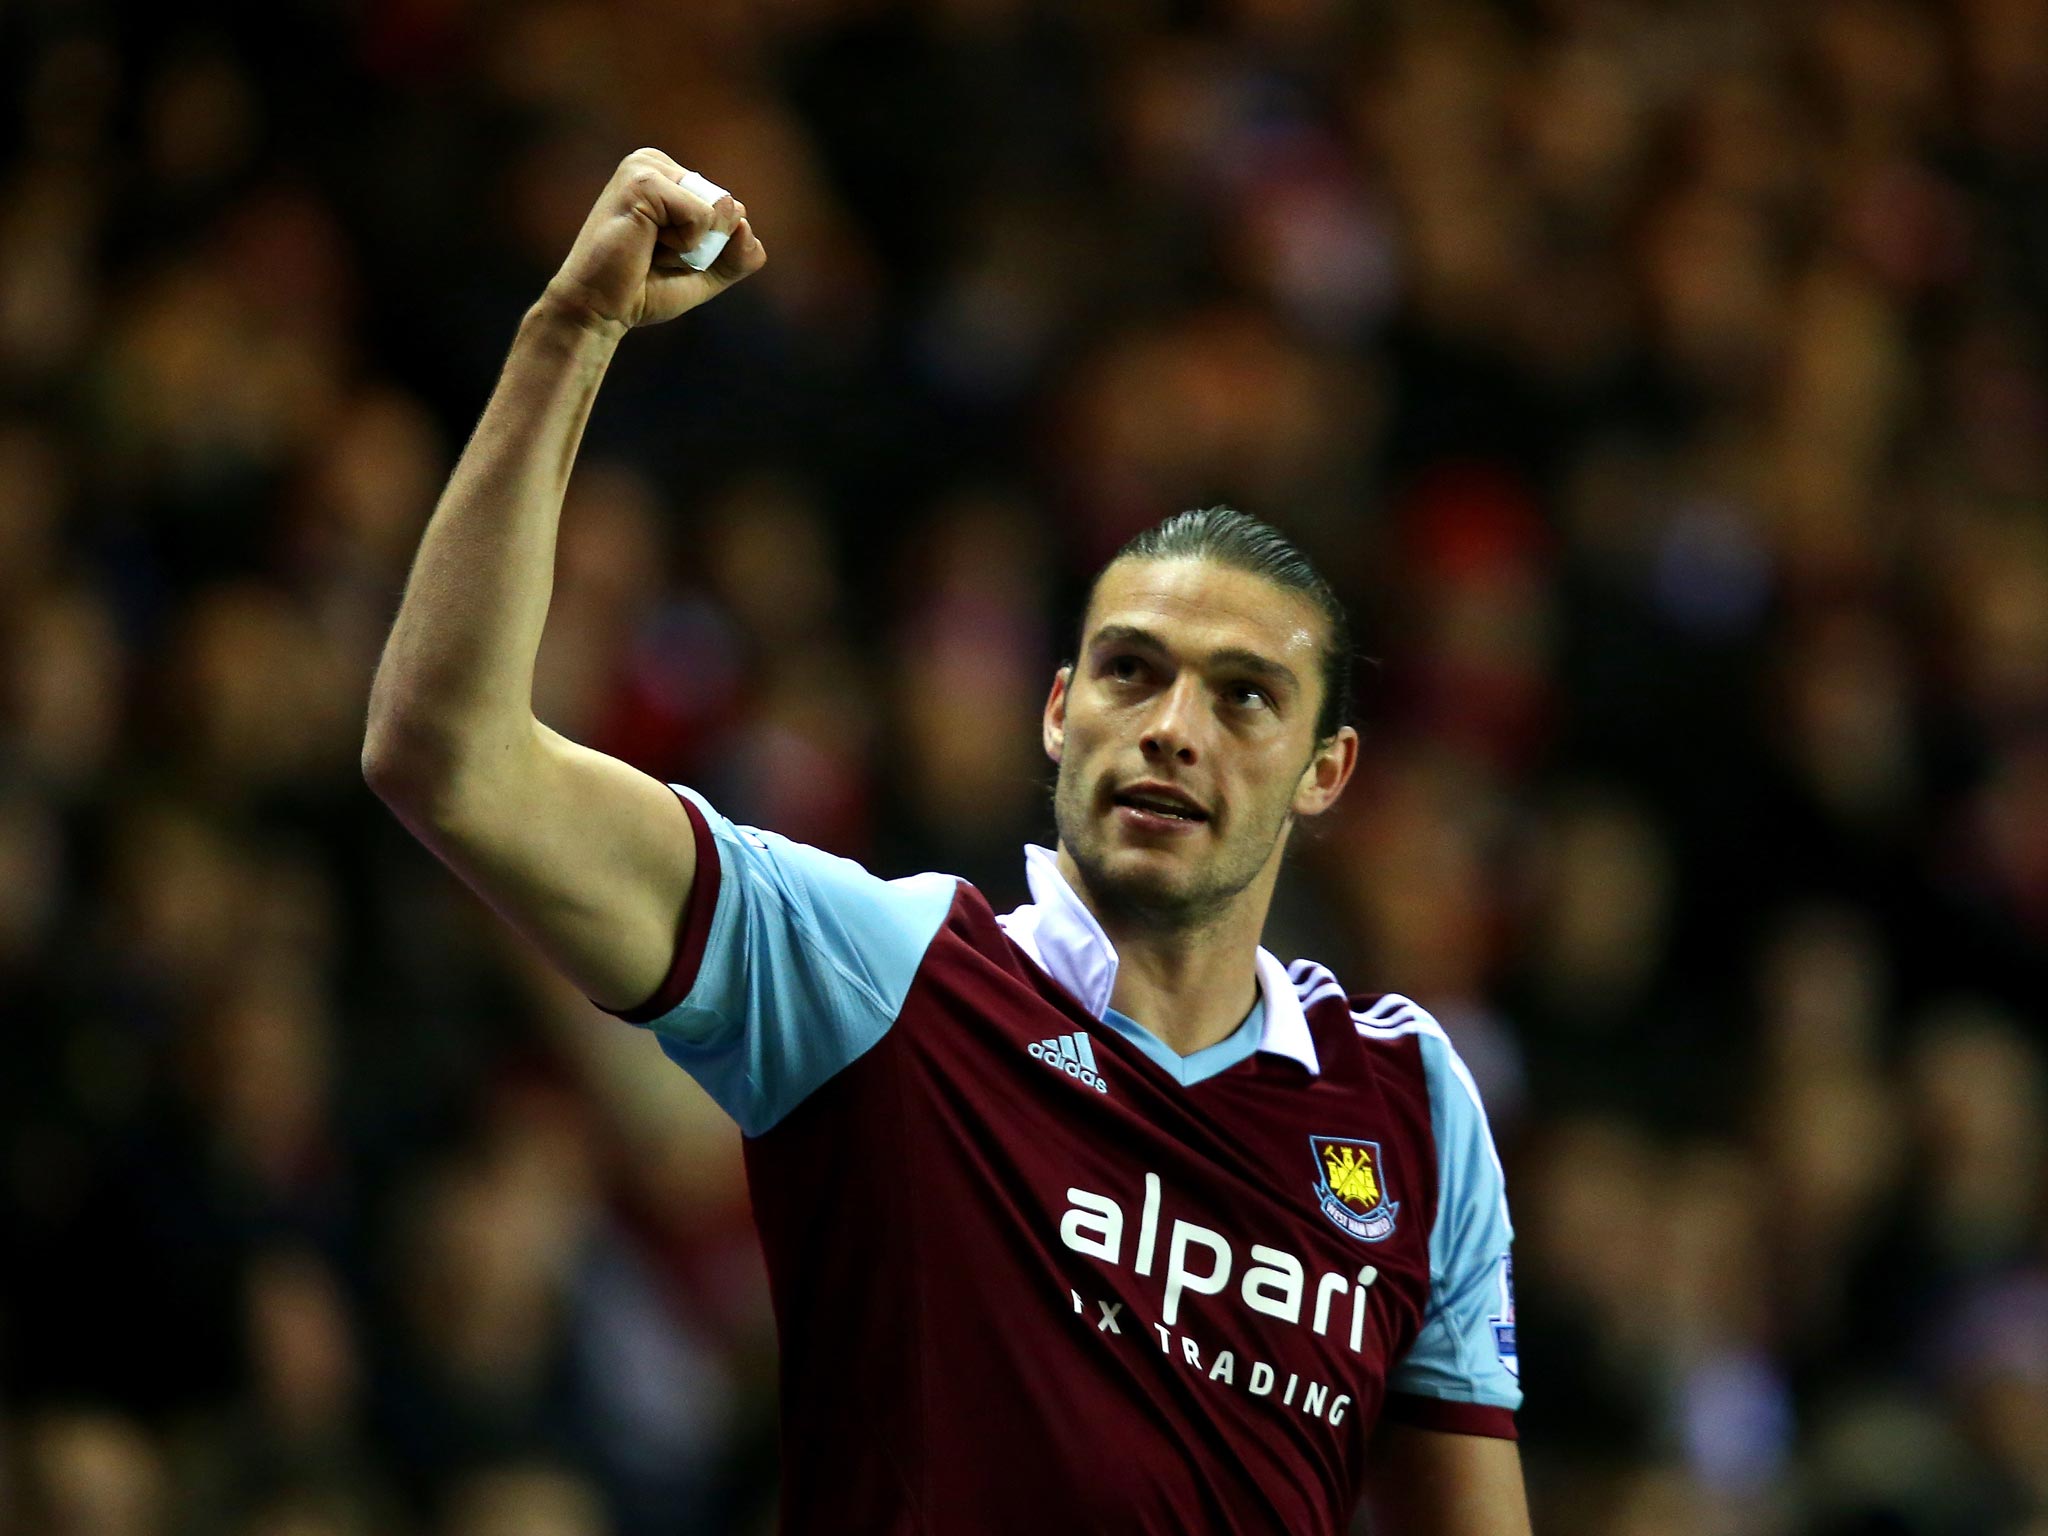 Andy Carroll celebrates his goal in the 2-1 victory over Sunderland